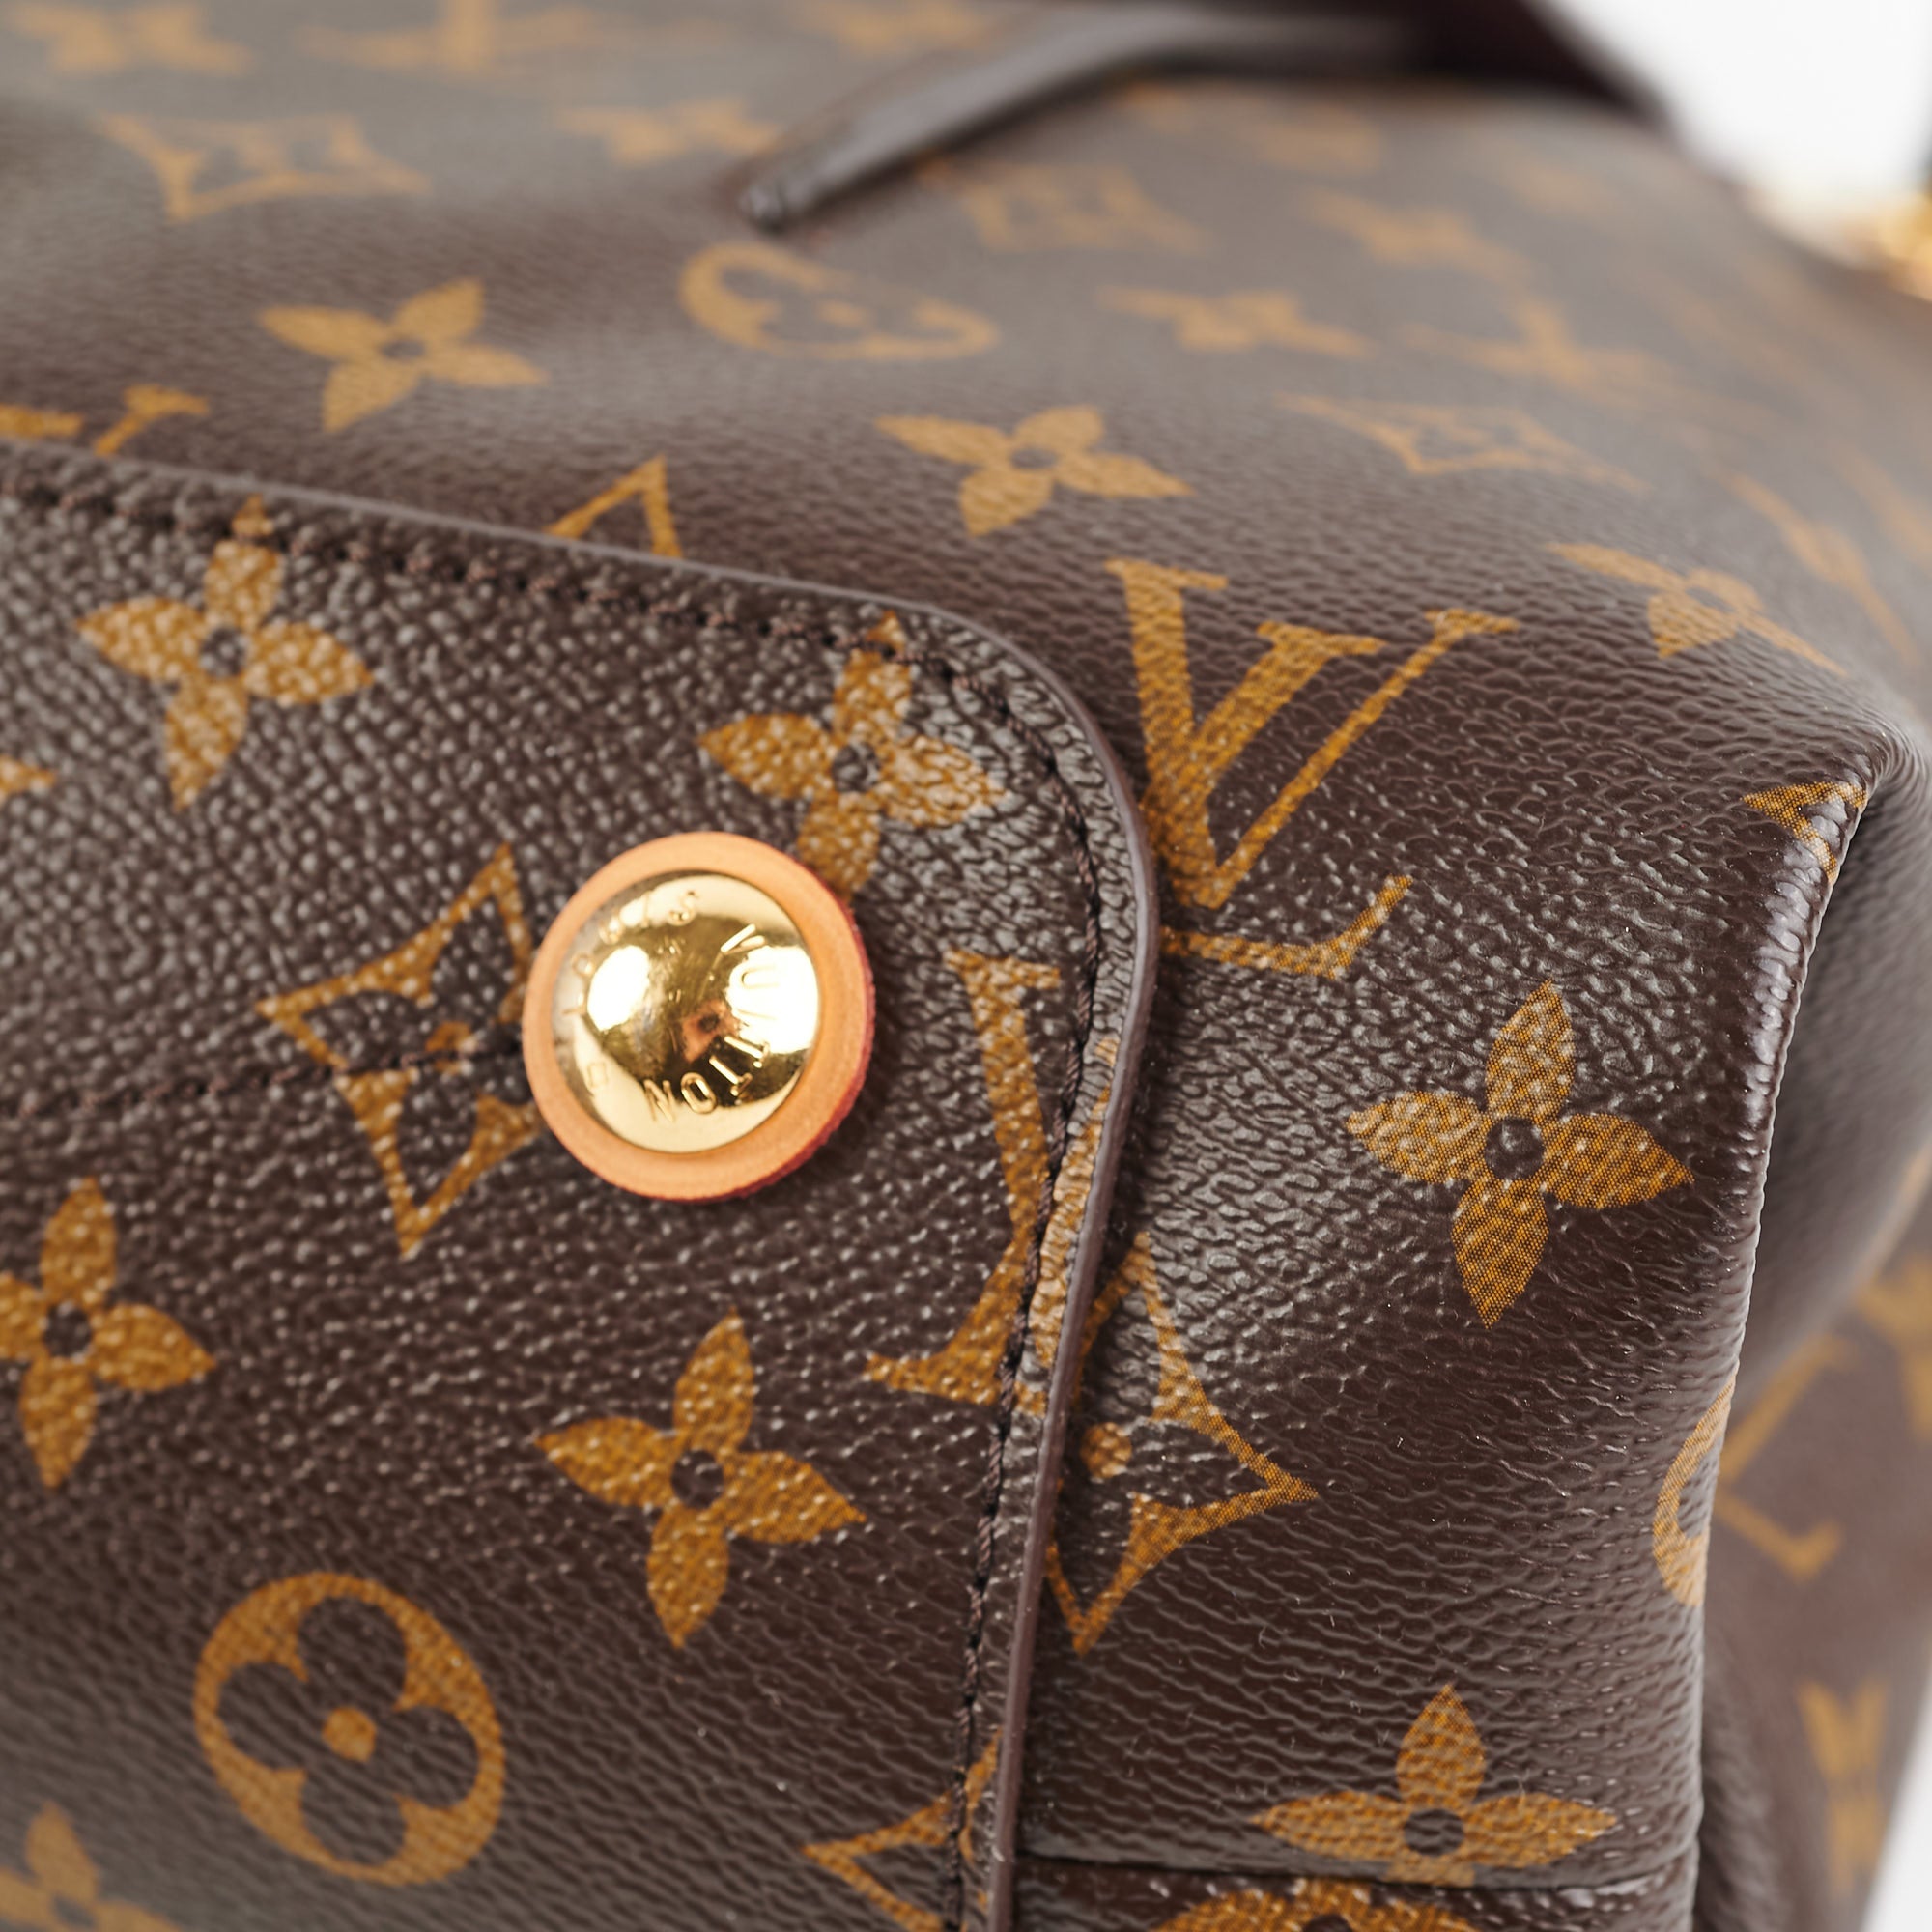 AUTHENTIC PREOWNED LOUIS VUITTON MONOGRAM OLYMPE